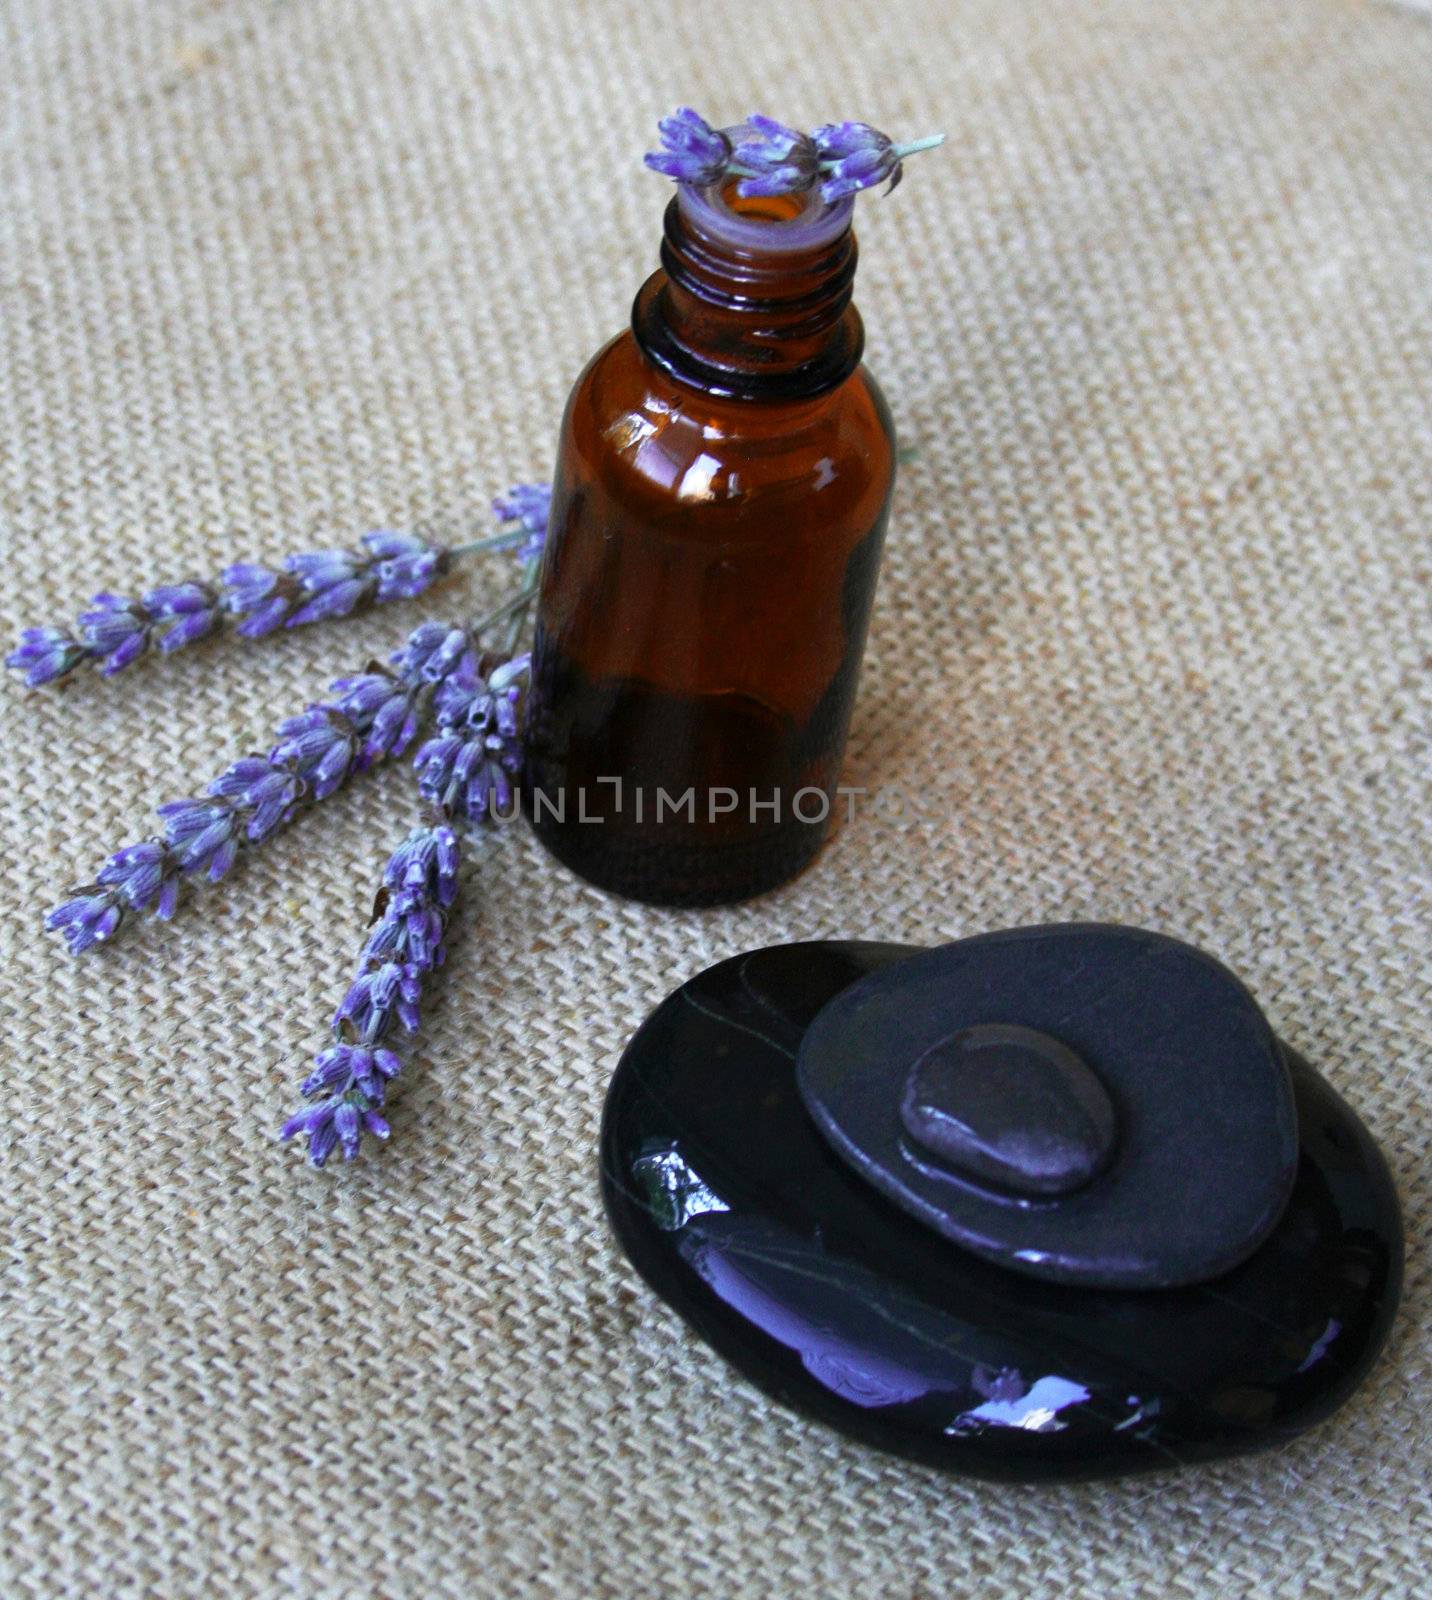 Lavender flowers and bottle of essential oil on sackcloth backgr by oxanatravel